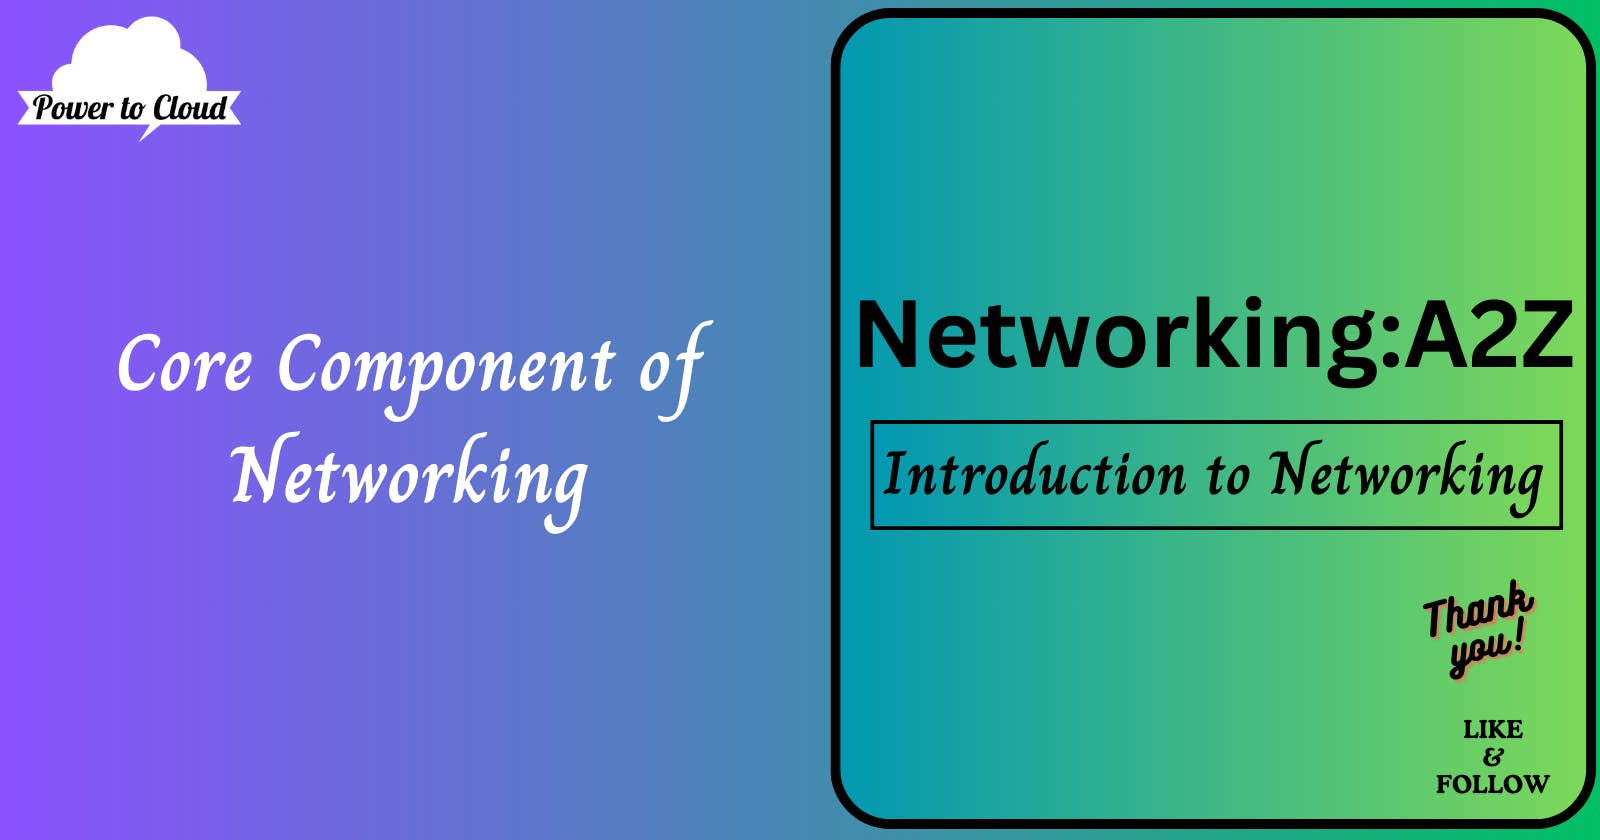 1.2 Core Component of Networking: Cables, Devices, and Protocols